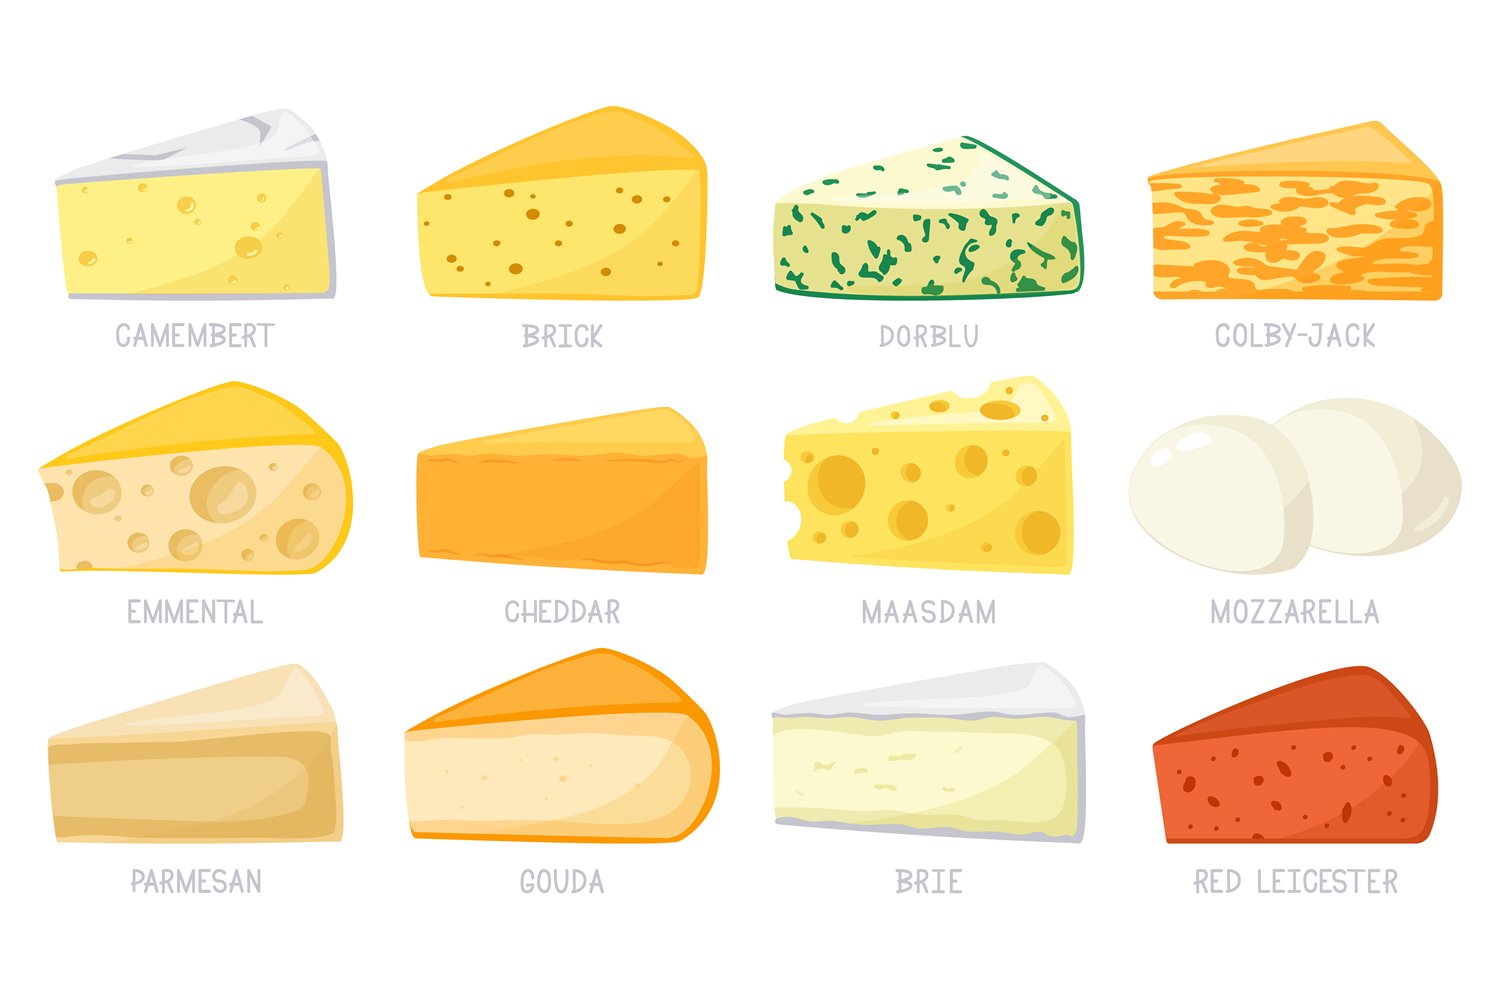 Set of cartoon images of different types of cheeses.